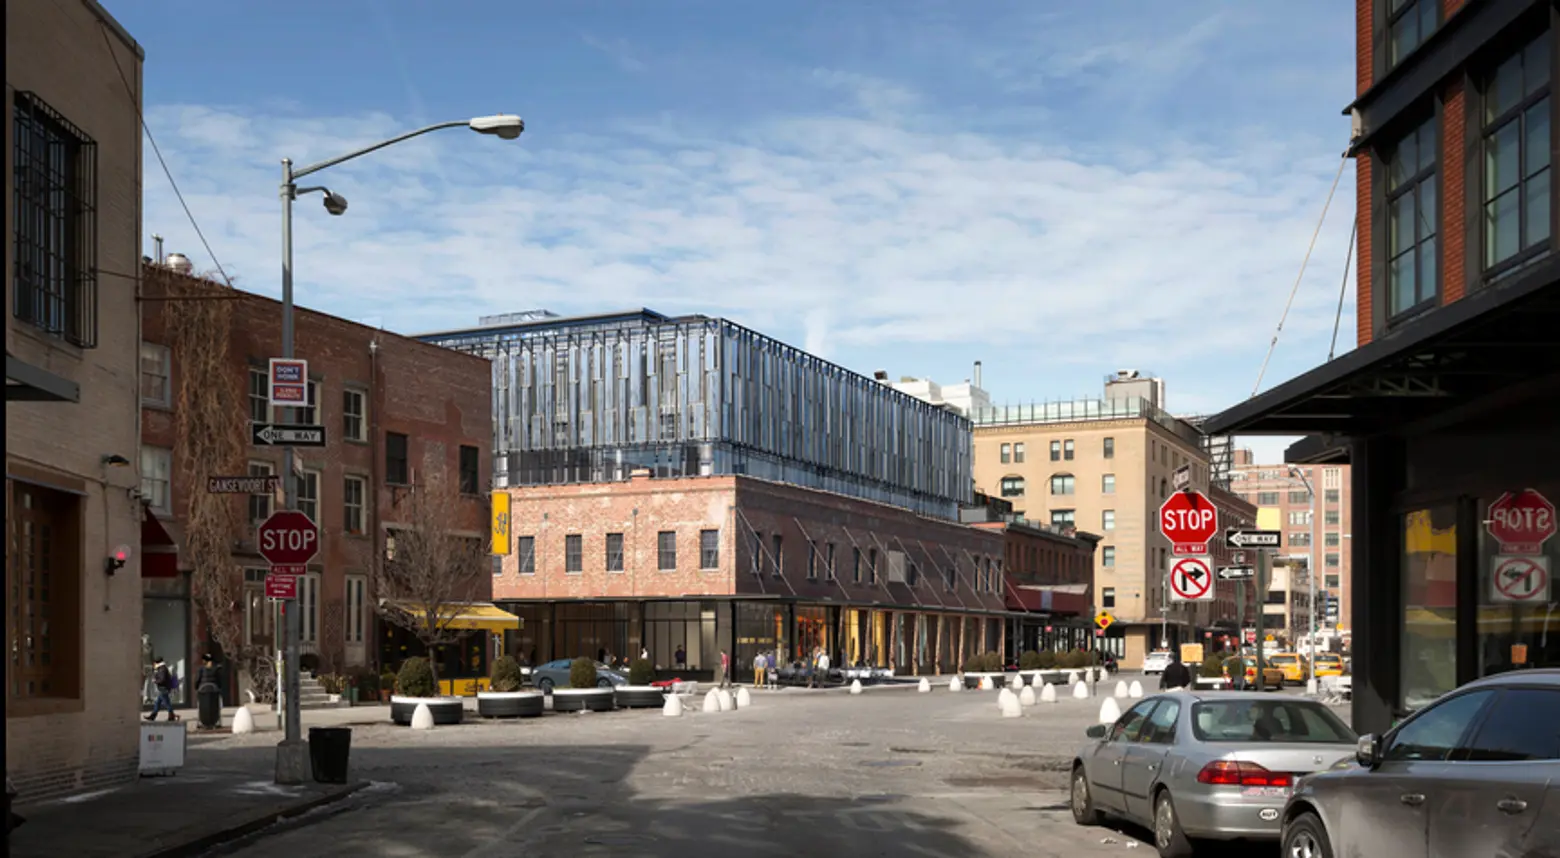 Landmarks Greenlights BKSK Architects’ Glass Topper for the Pastis Building – Locals Not Happy